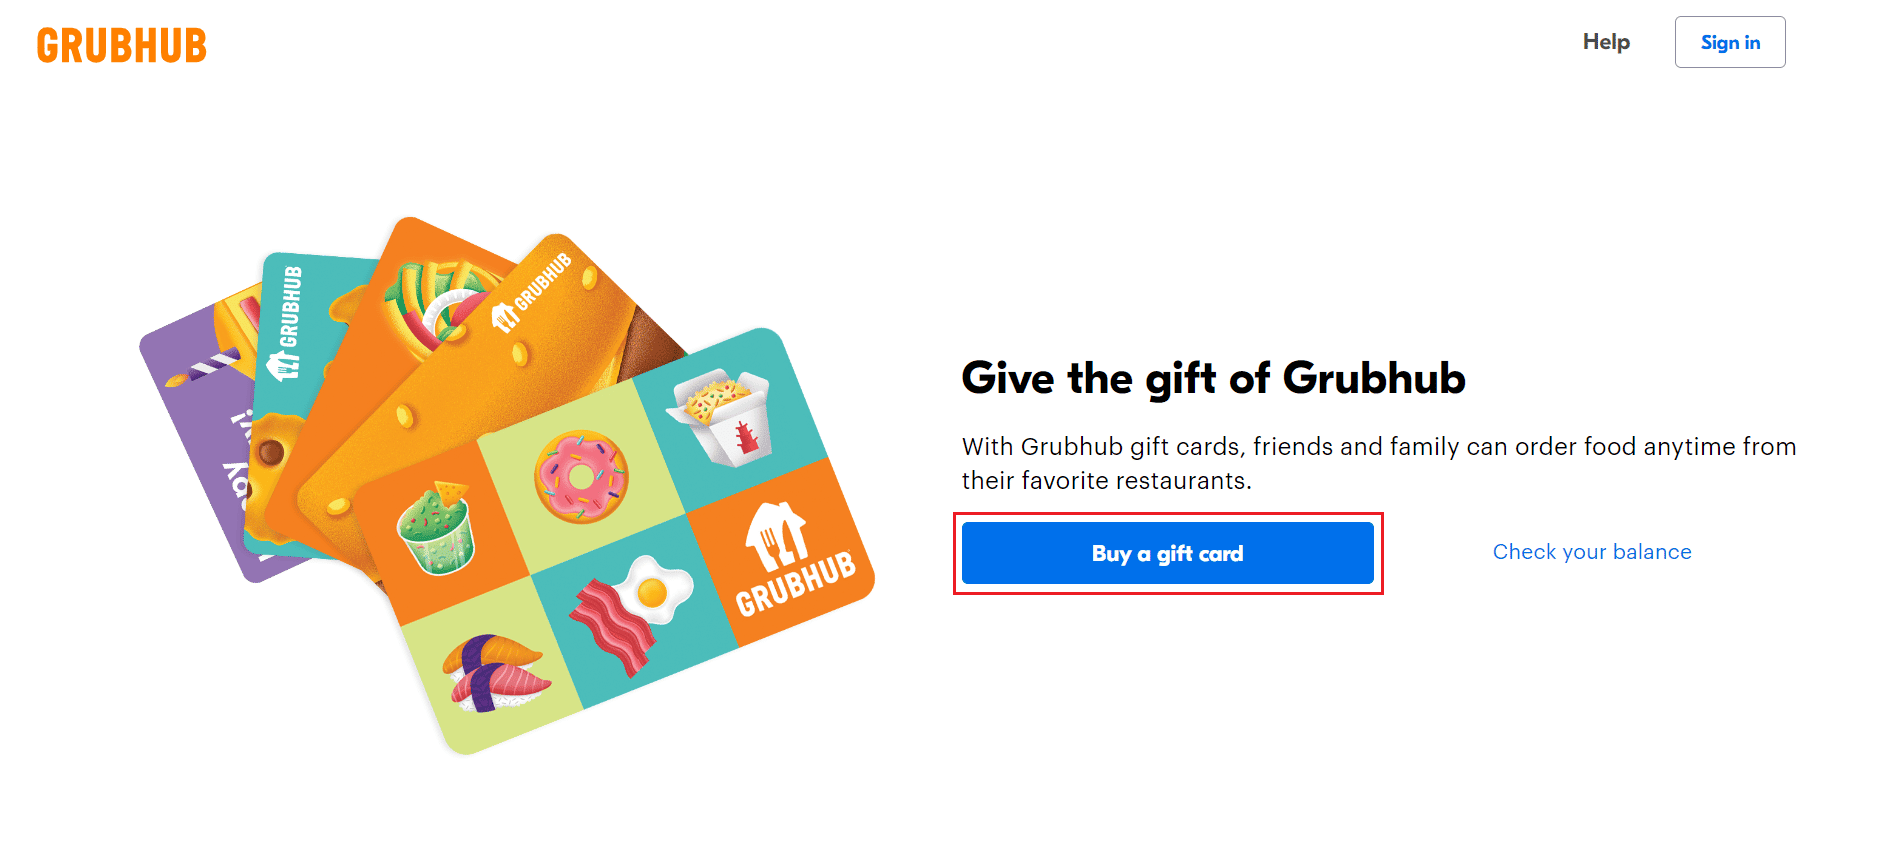 Visit the Grubhub Gift Cards website on your website and click on Buy a gift card